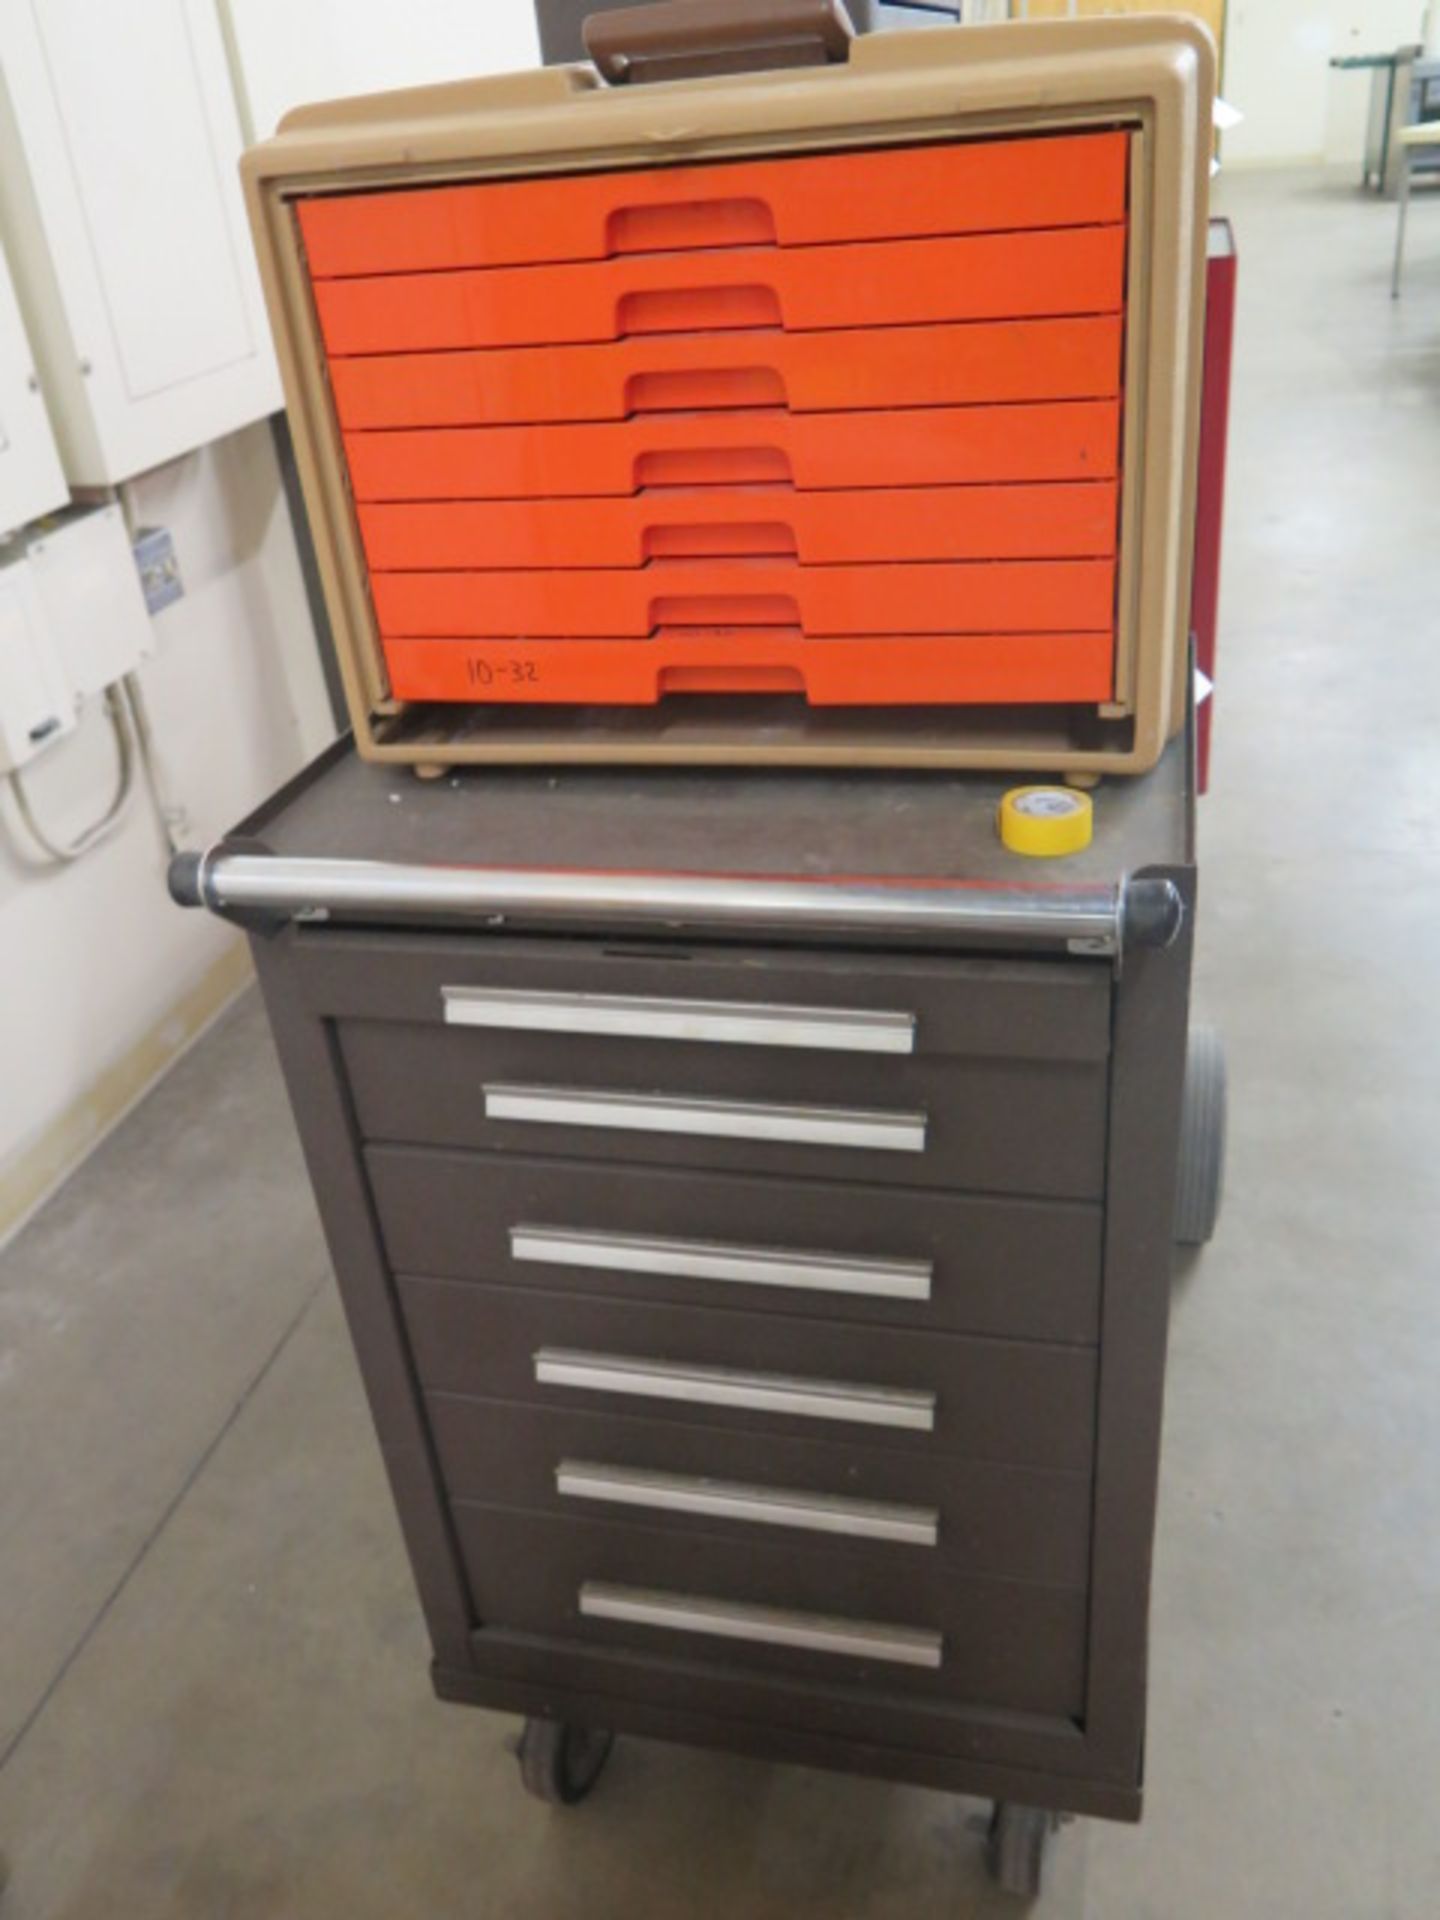 Kennedy Roll-A-Way Tool Box - Image 5 of 8